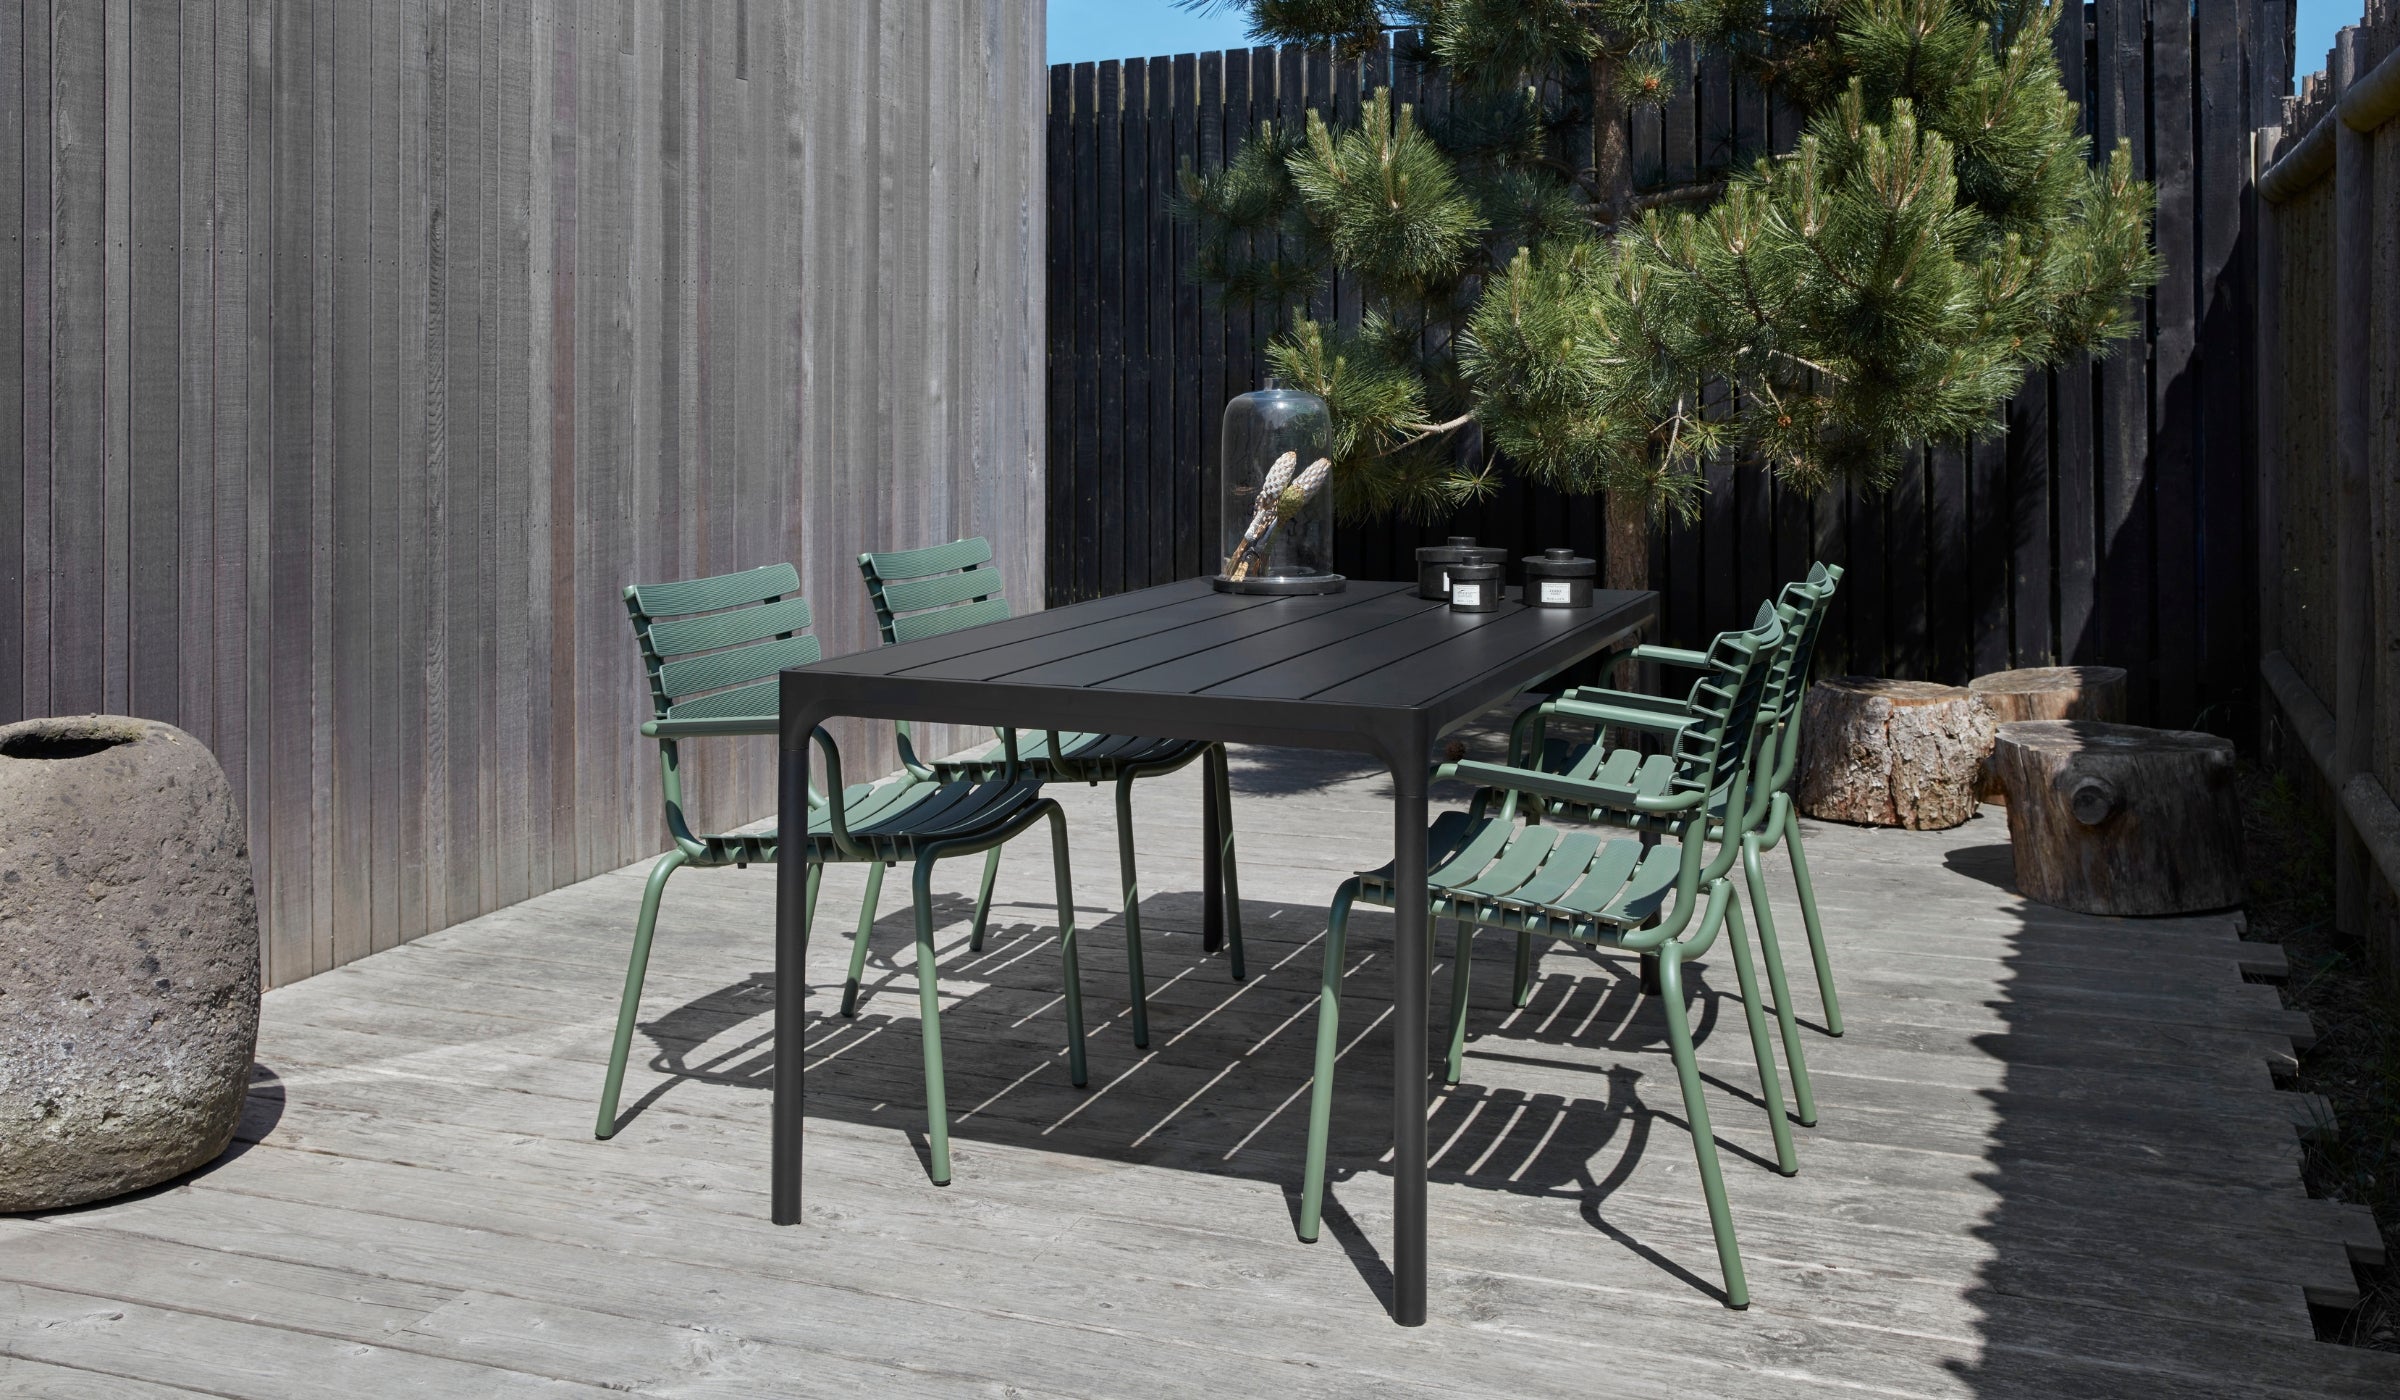 Reclips - Outdoor chair in aluminum and recycled plastic with armrests, olive green